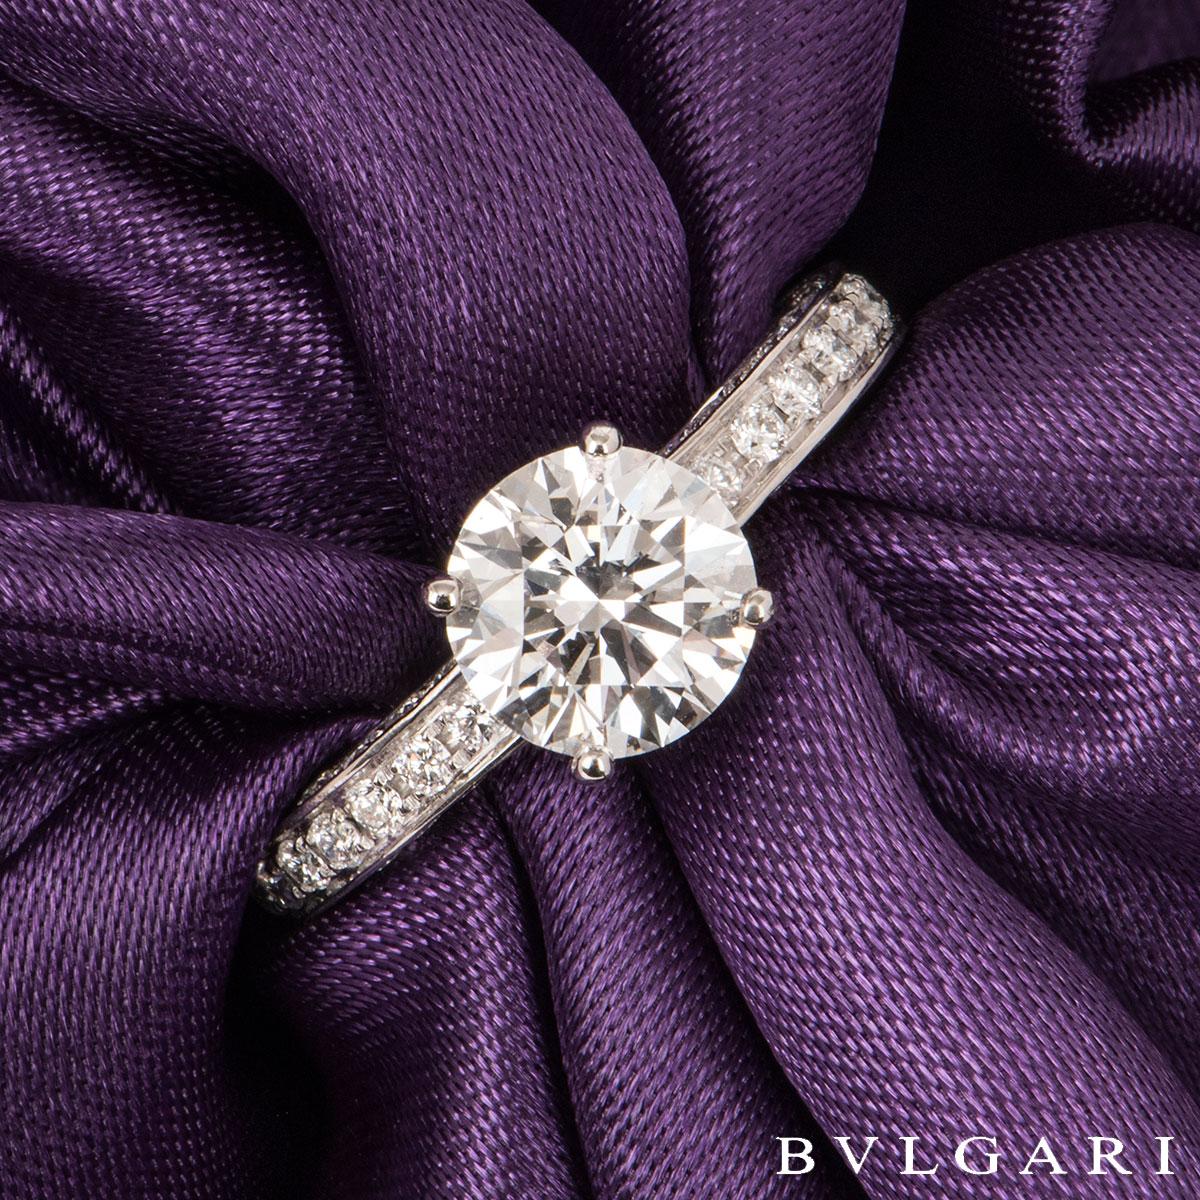 A stunning diamond Bvlgari ring in Platinum from the Dedicata a Venezia collection. The ring comprises of a round brilliant cut diamond in a four claw setting with a weight of 1.50ct, D colour and VS2 clarity. The ring features 54 round brilliant